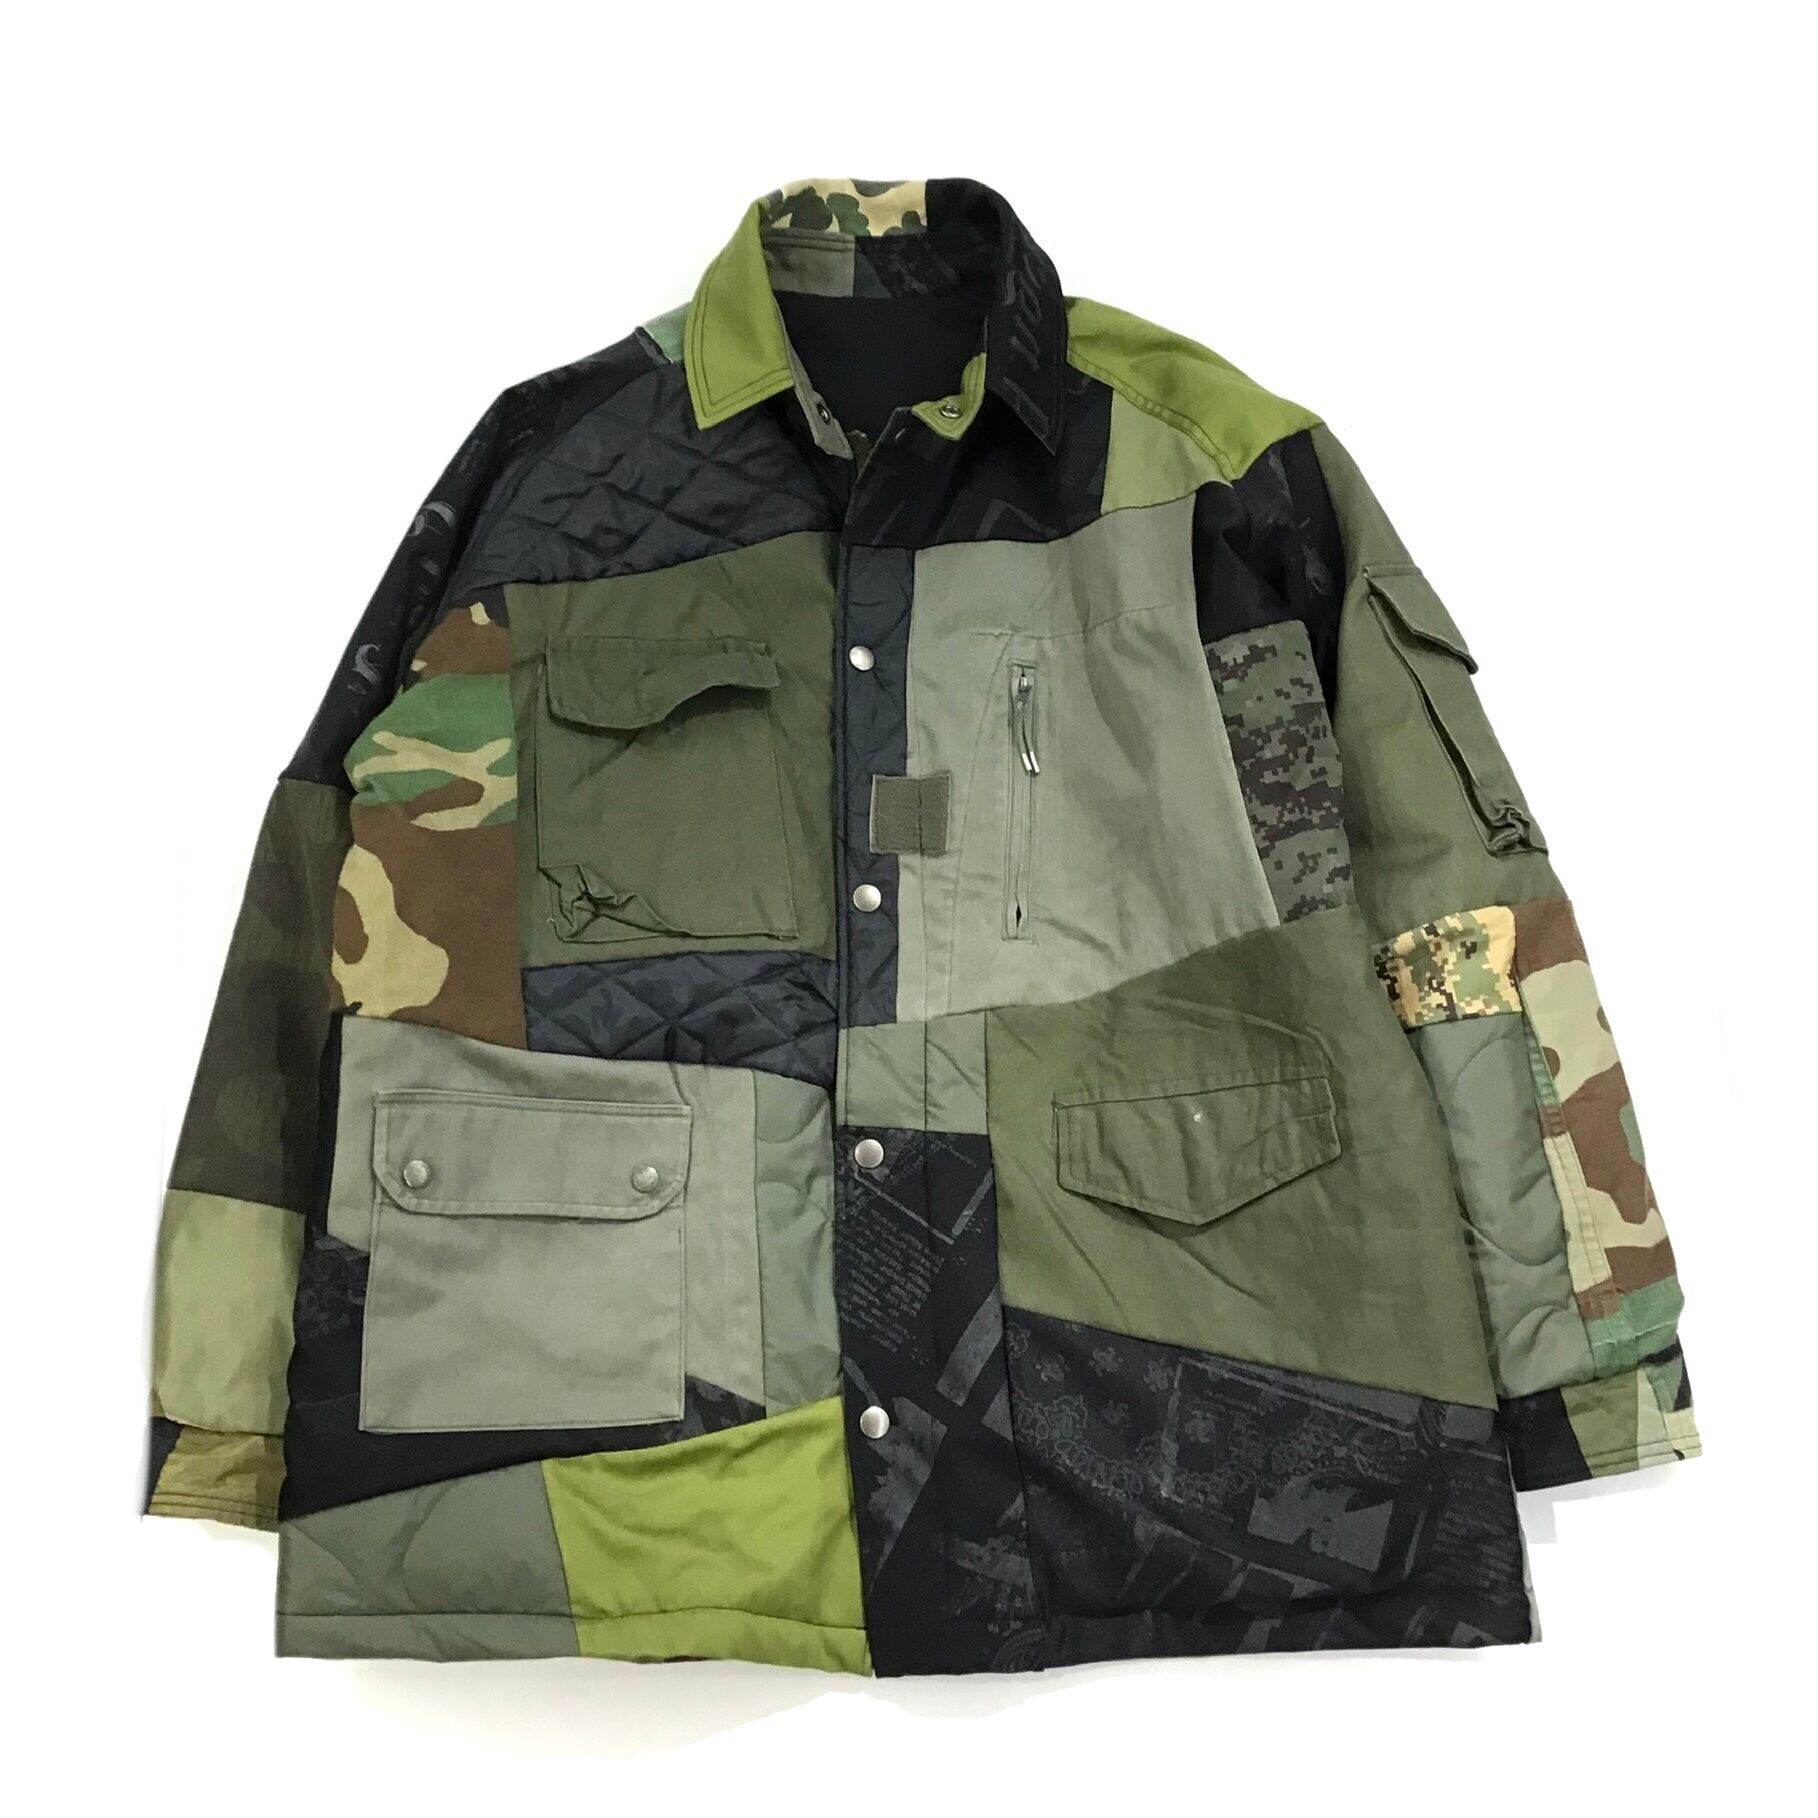 Military jacket | 【COTEMER コートメール】official web shop